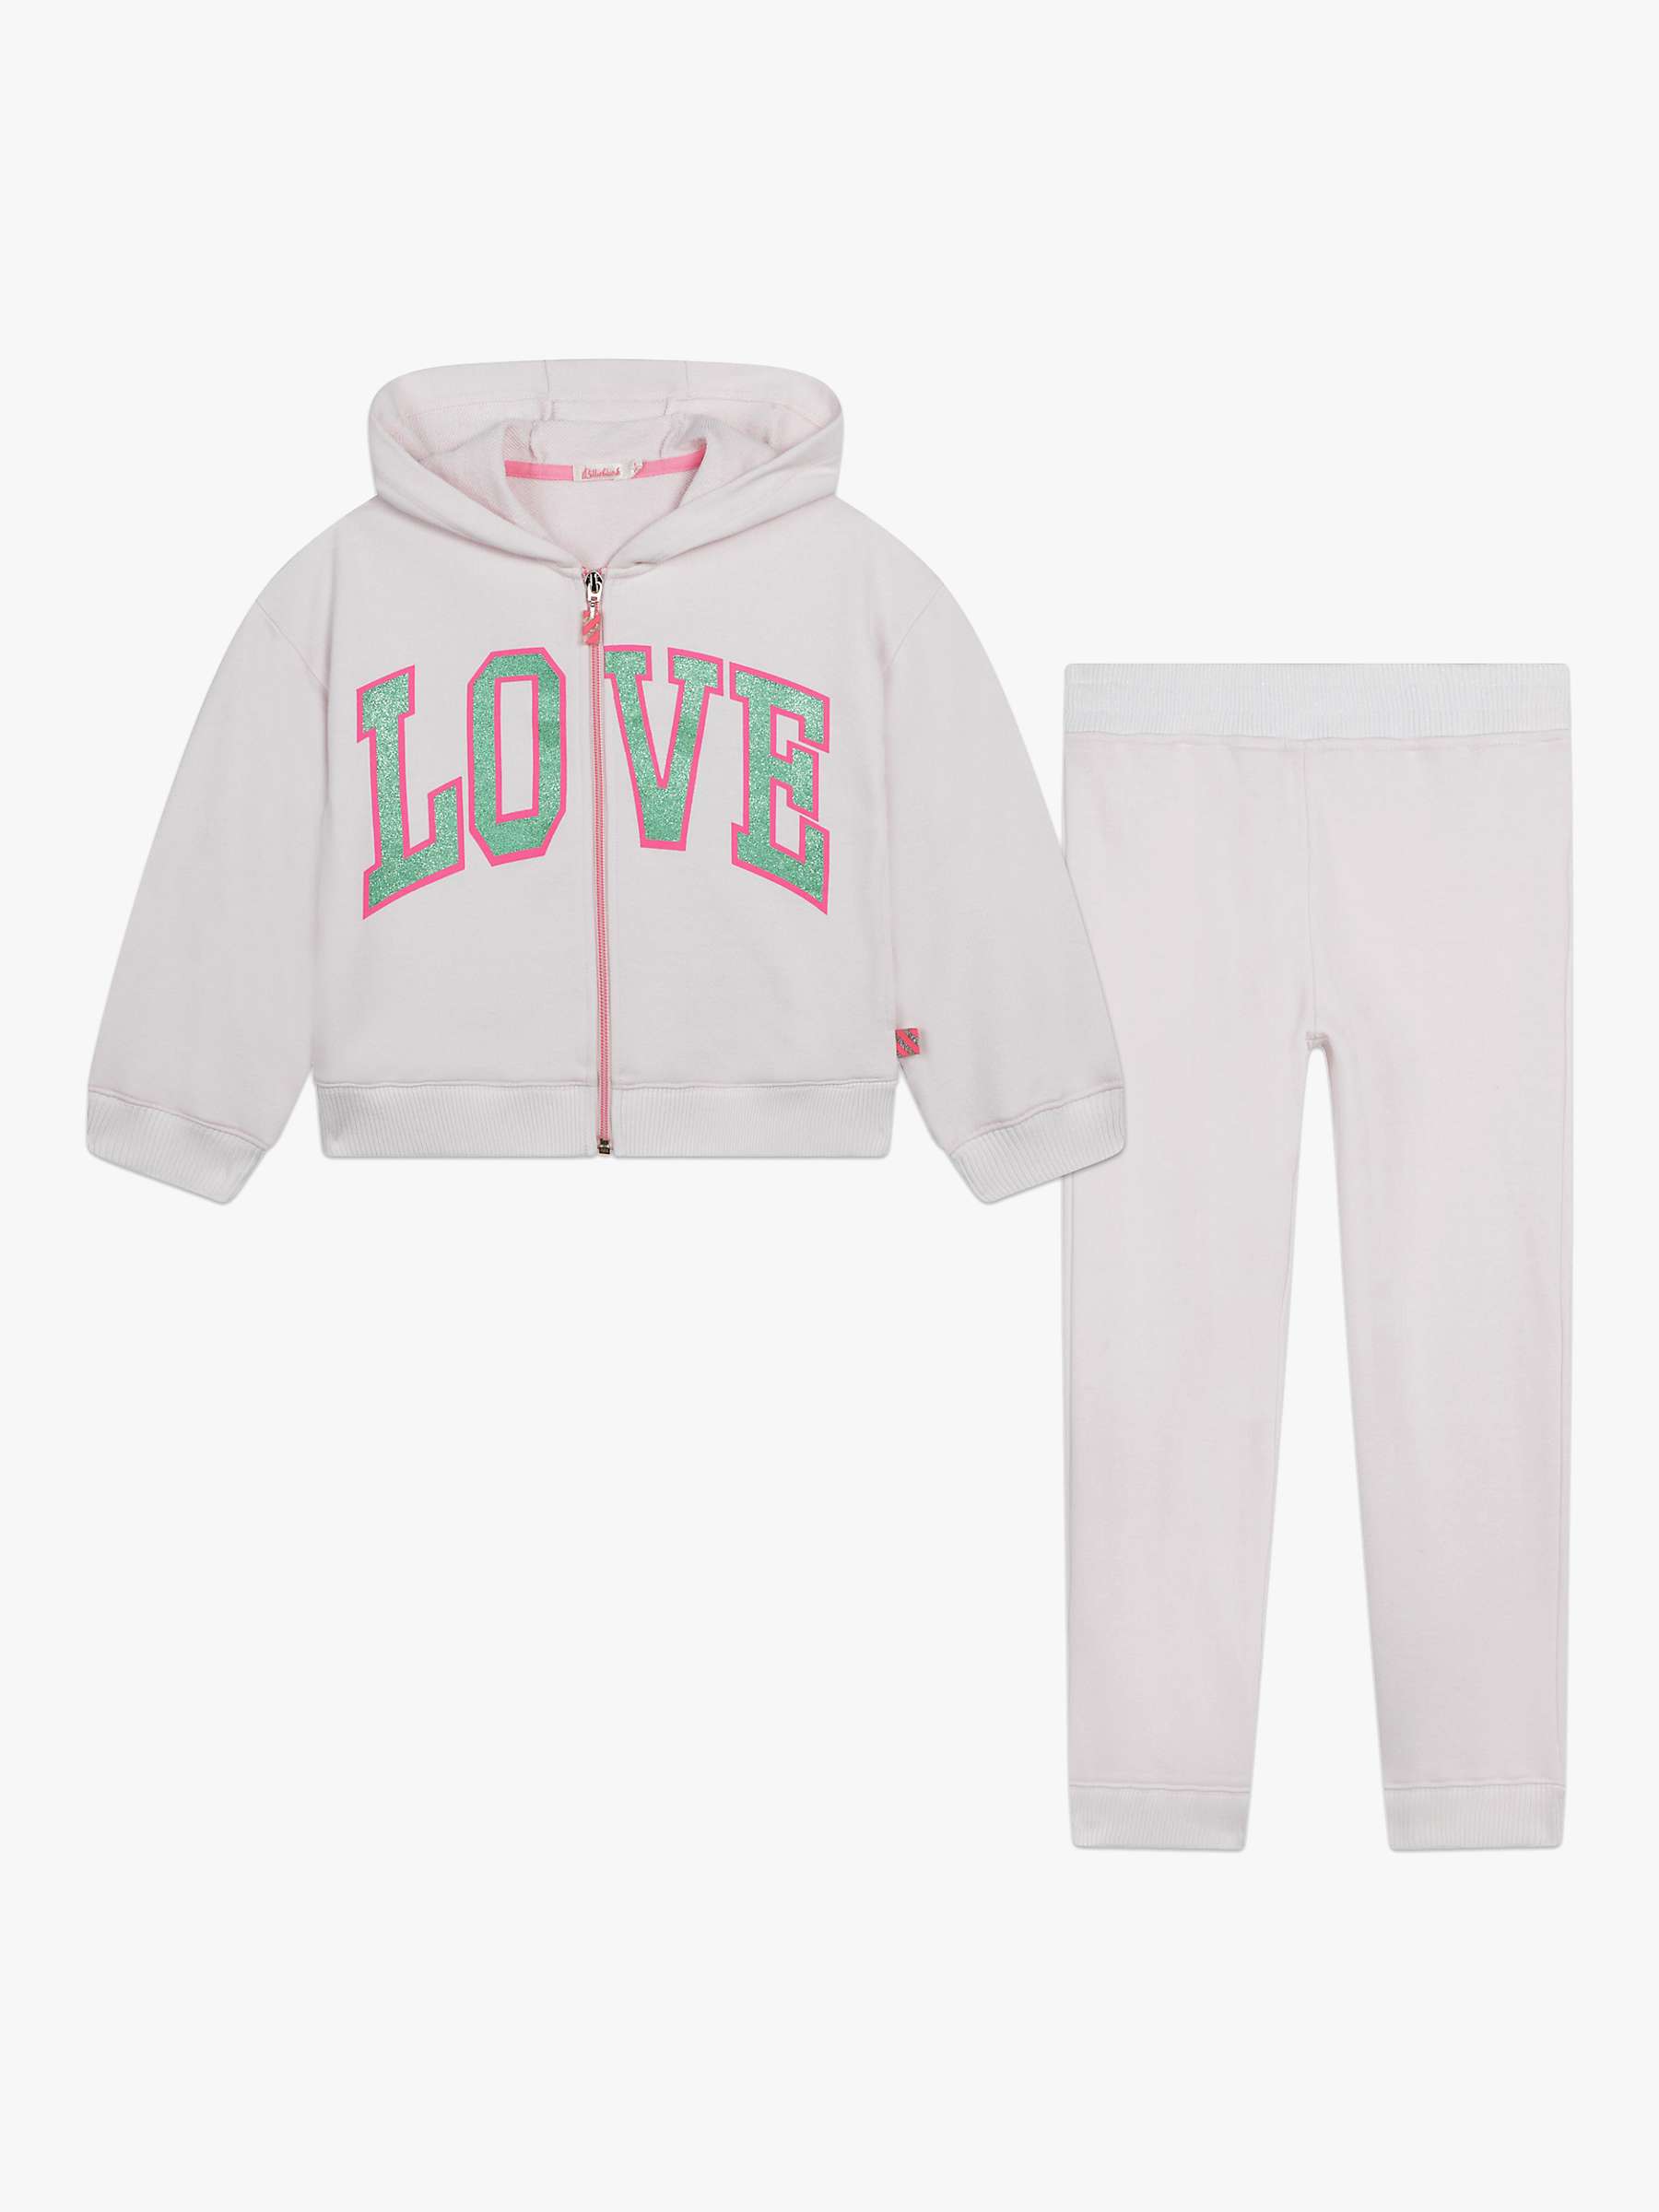 Buy Billieblush Kids' French Terry Hooded Tracksuit Set, Light Pink Online at johnlewis.com